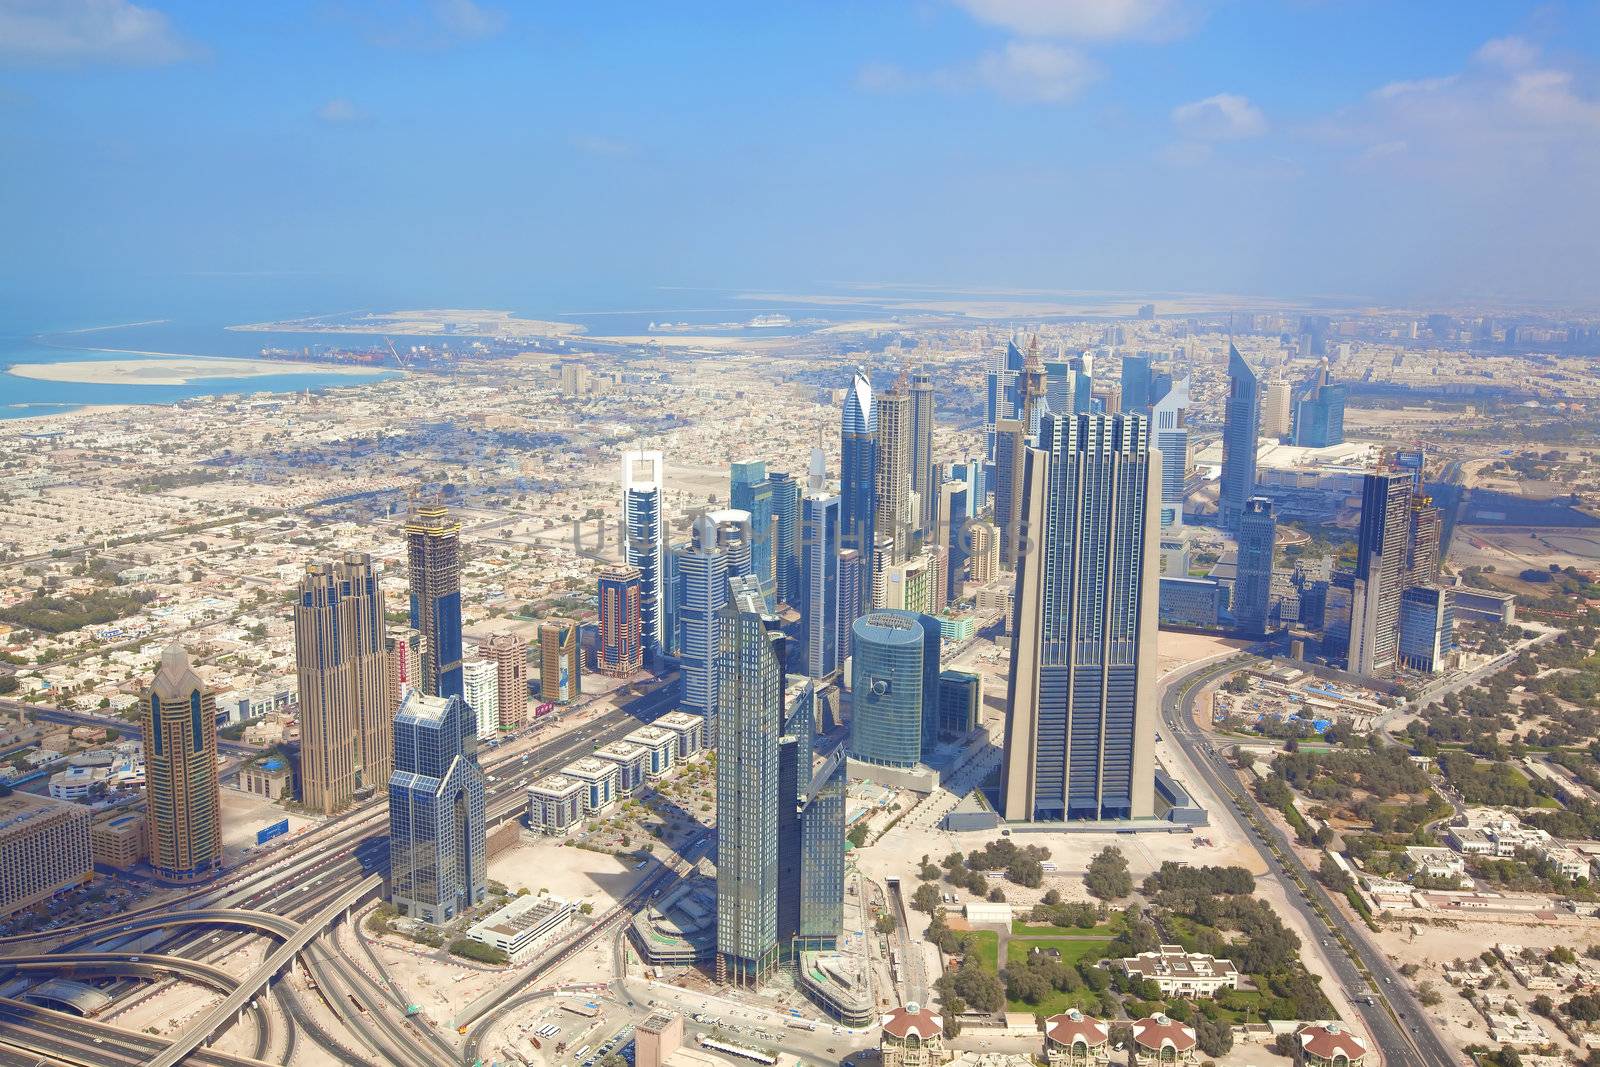 View over skyscrapers and roads in Dubai city